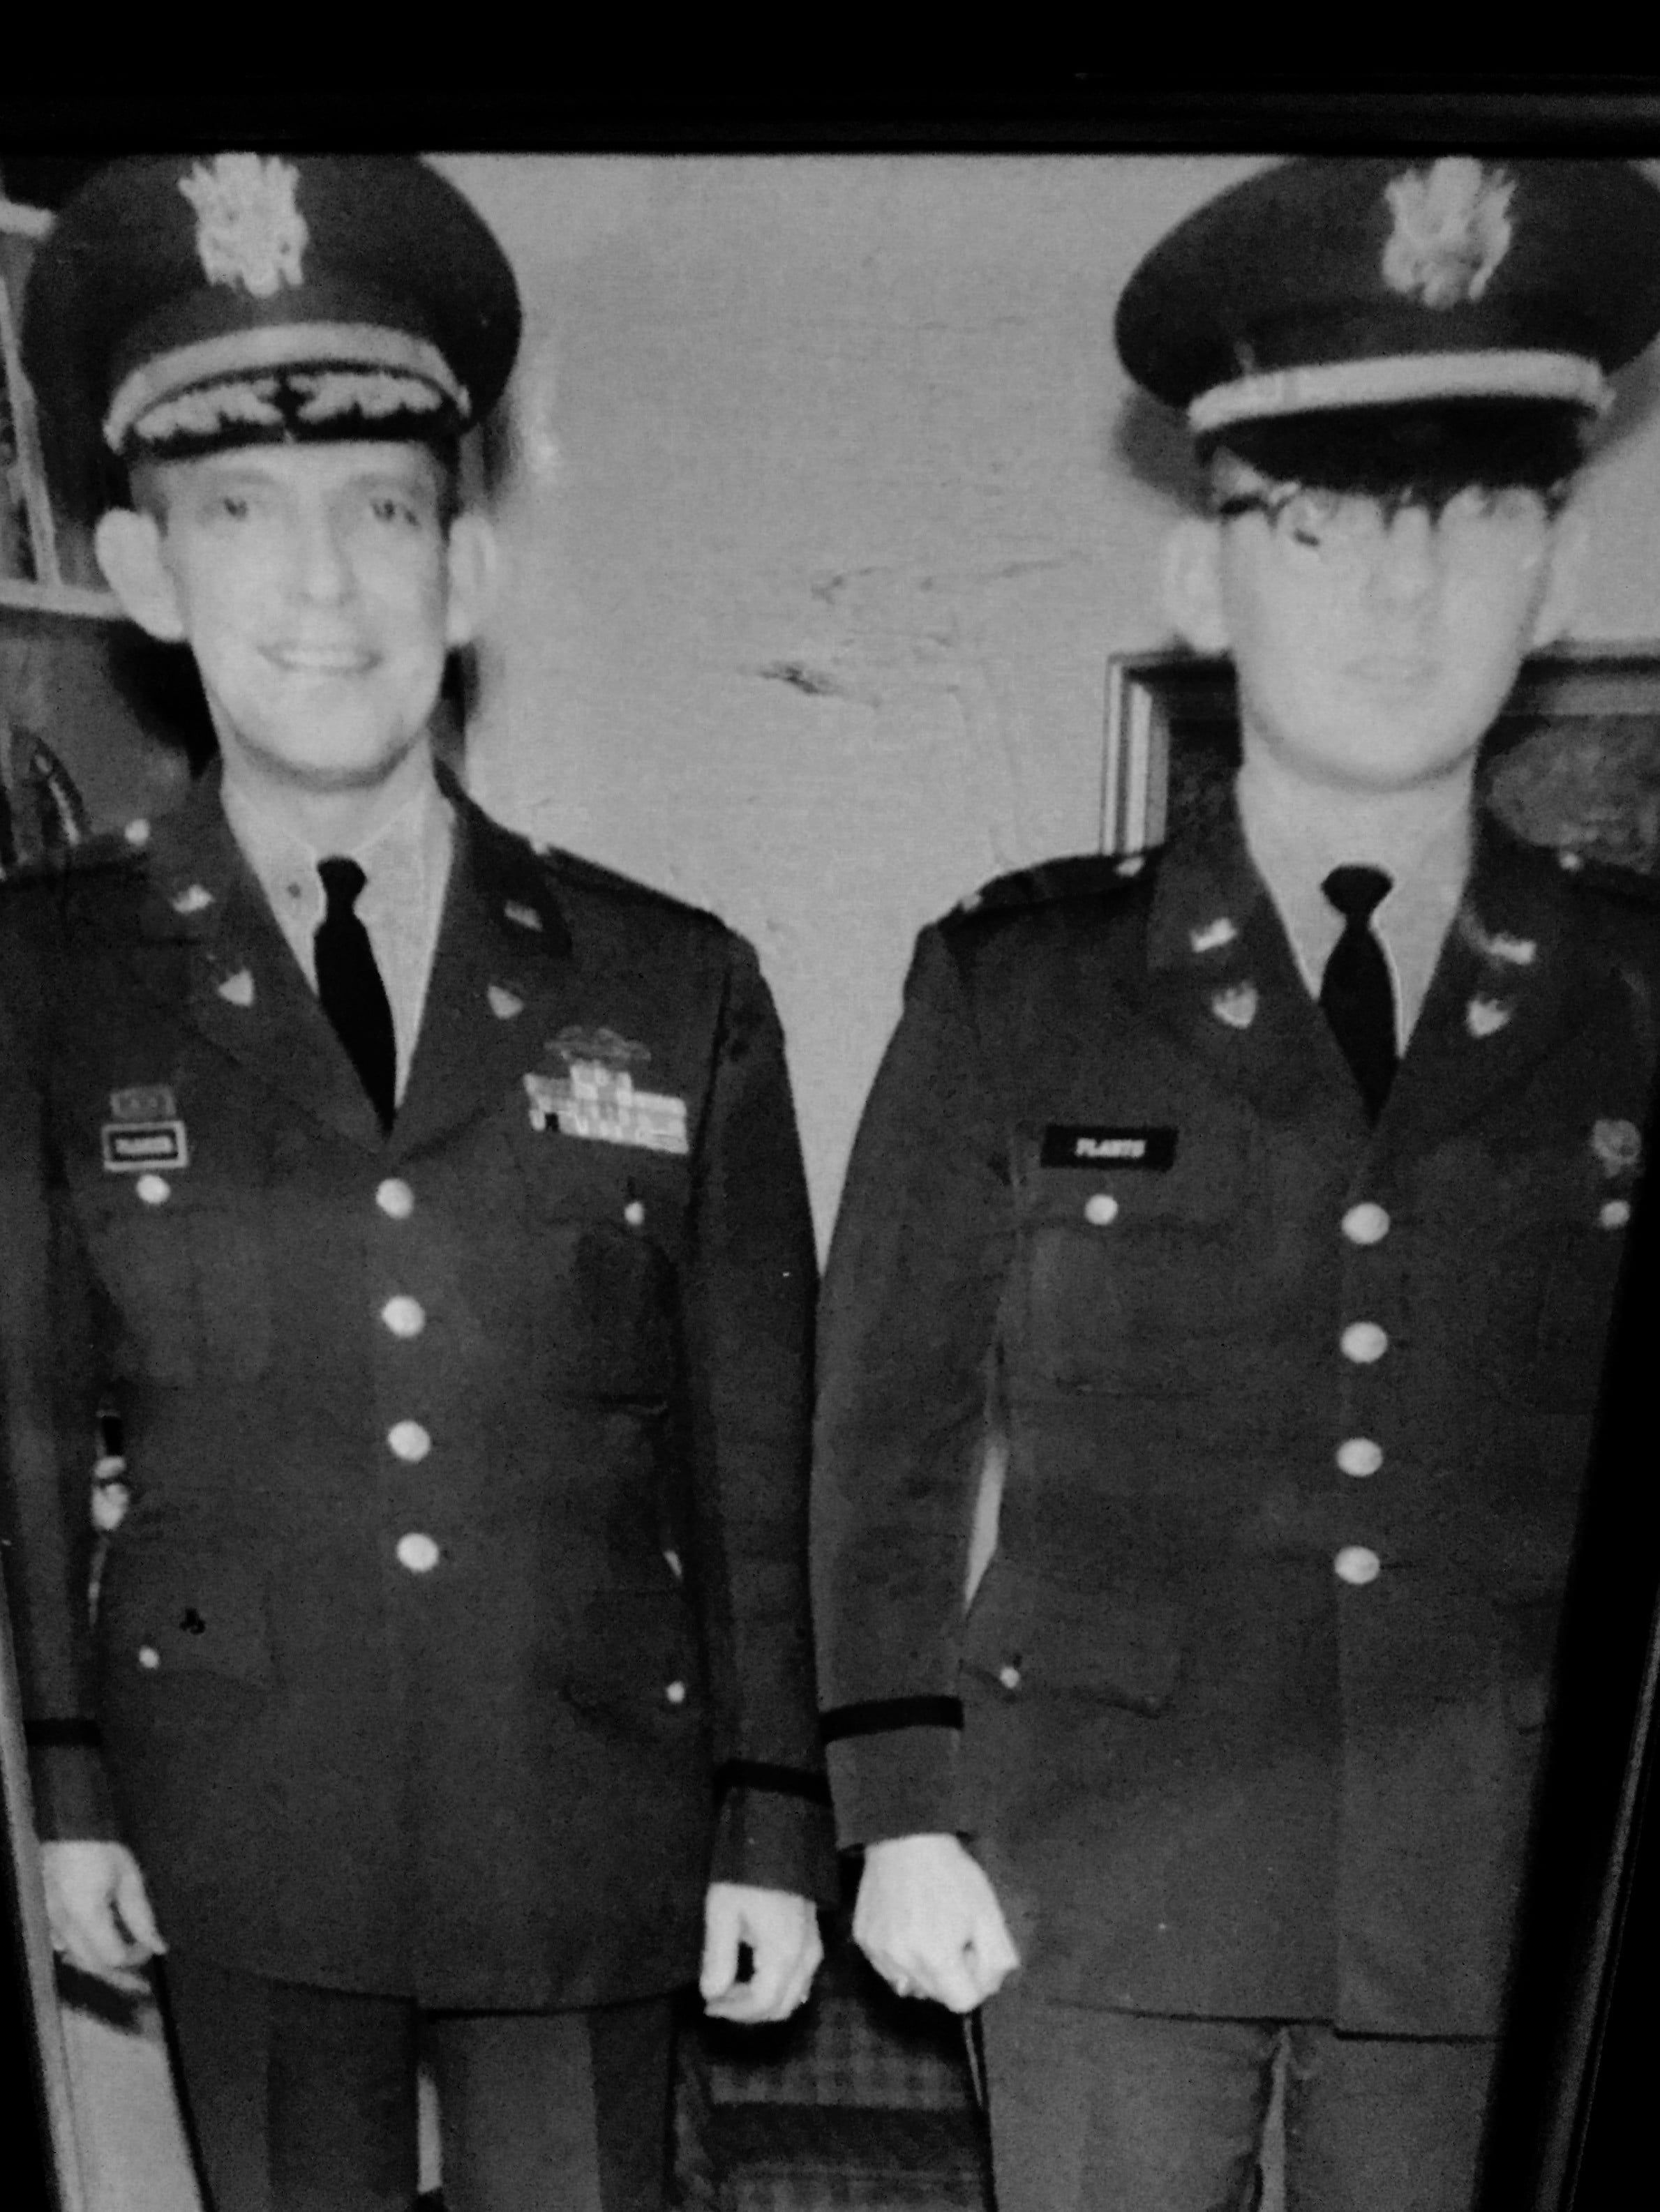 Colonel Weldon Leonard Plants (Army) and 2nd Lt. Leonard Weldon Plants (Army)